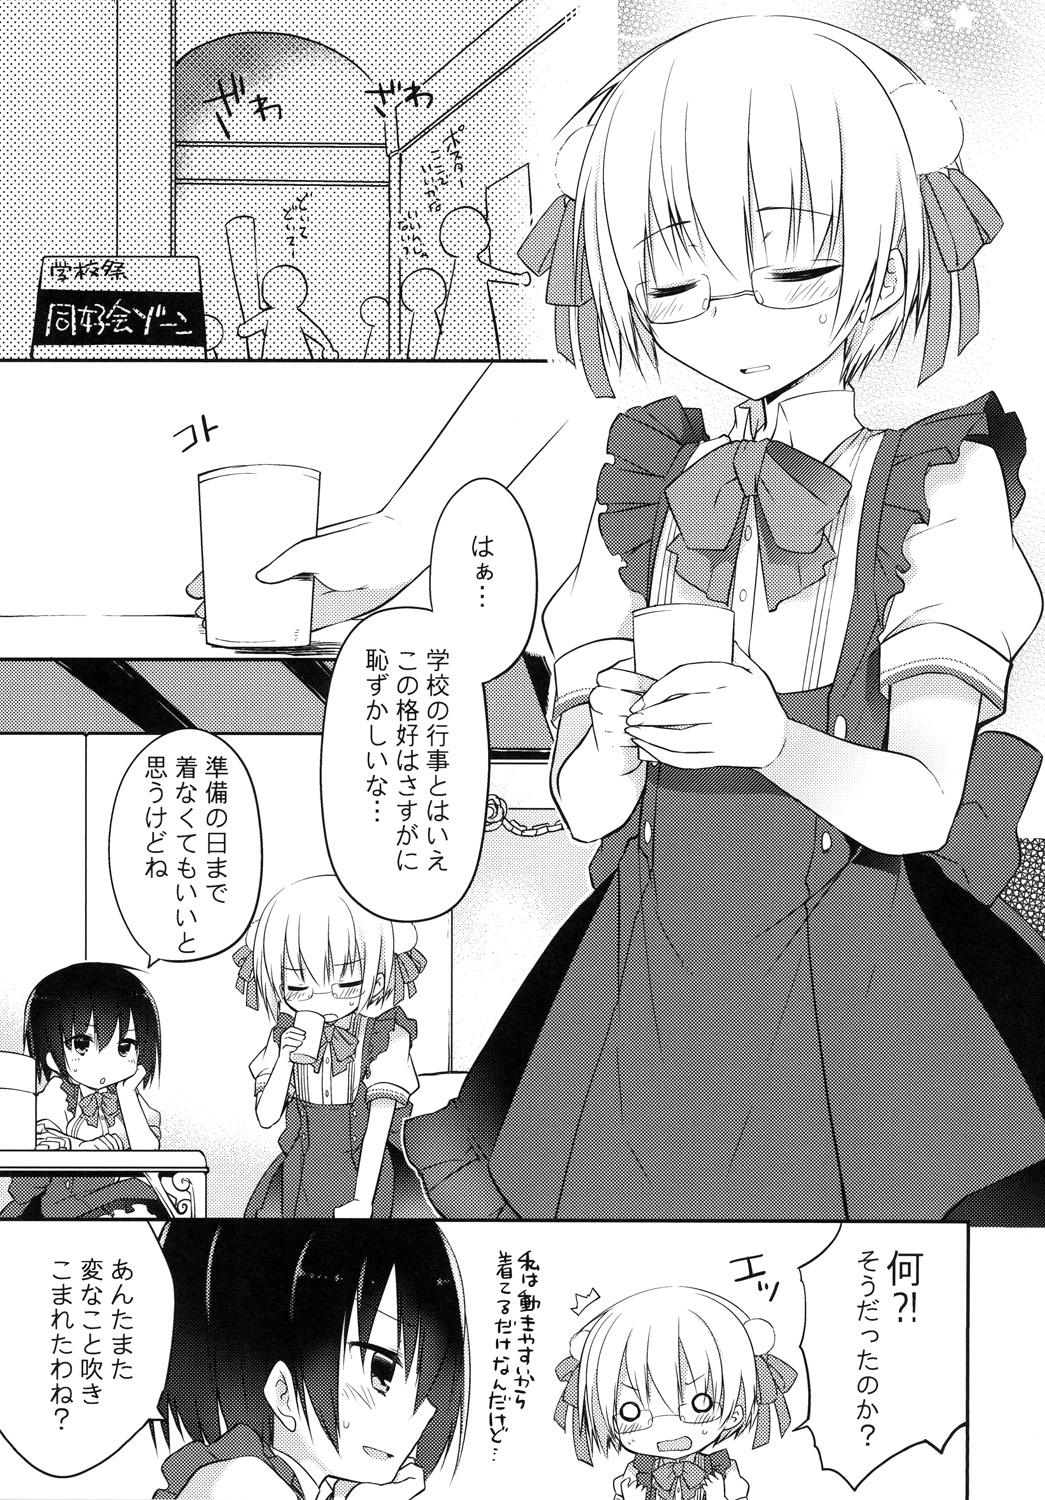 Online gyou-kan! 3 Whipping - Page 4